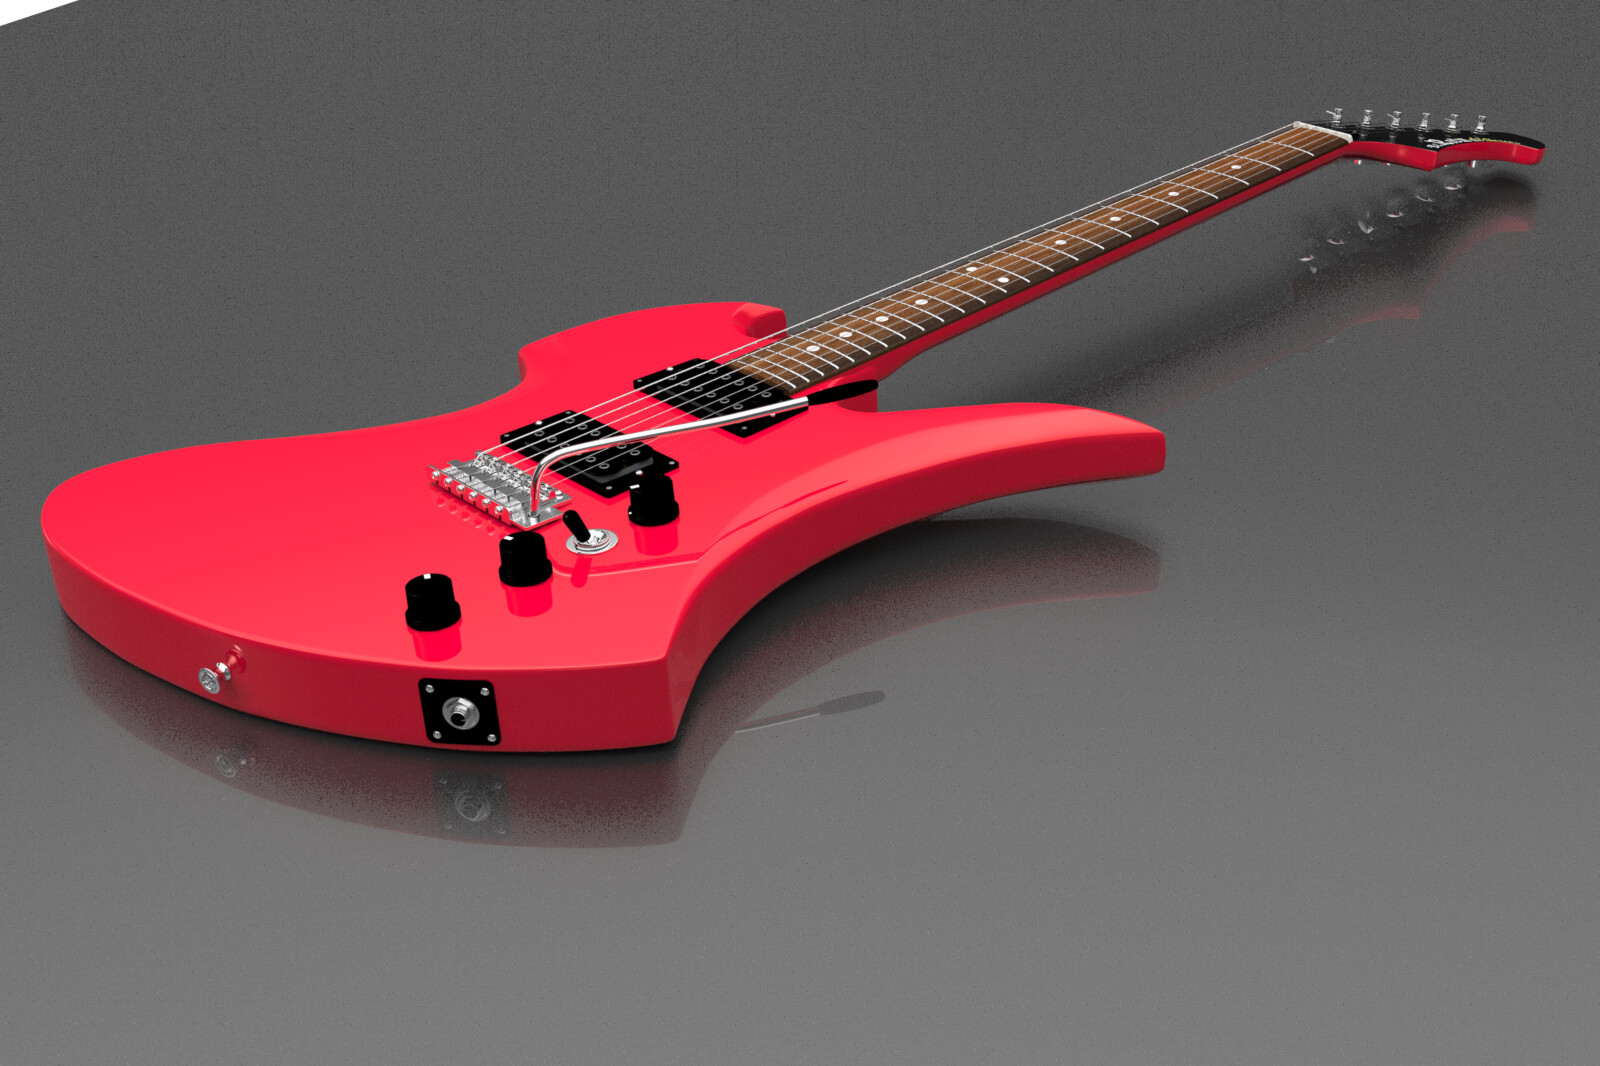 BC Rich modeled in Modo - this is an in-modo render. I converted this model to a native ArchiCAD object, with appropriate vectorial cleanups and the ability for the materials to be easily tweaked in use.